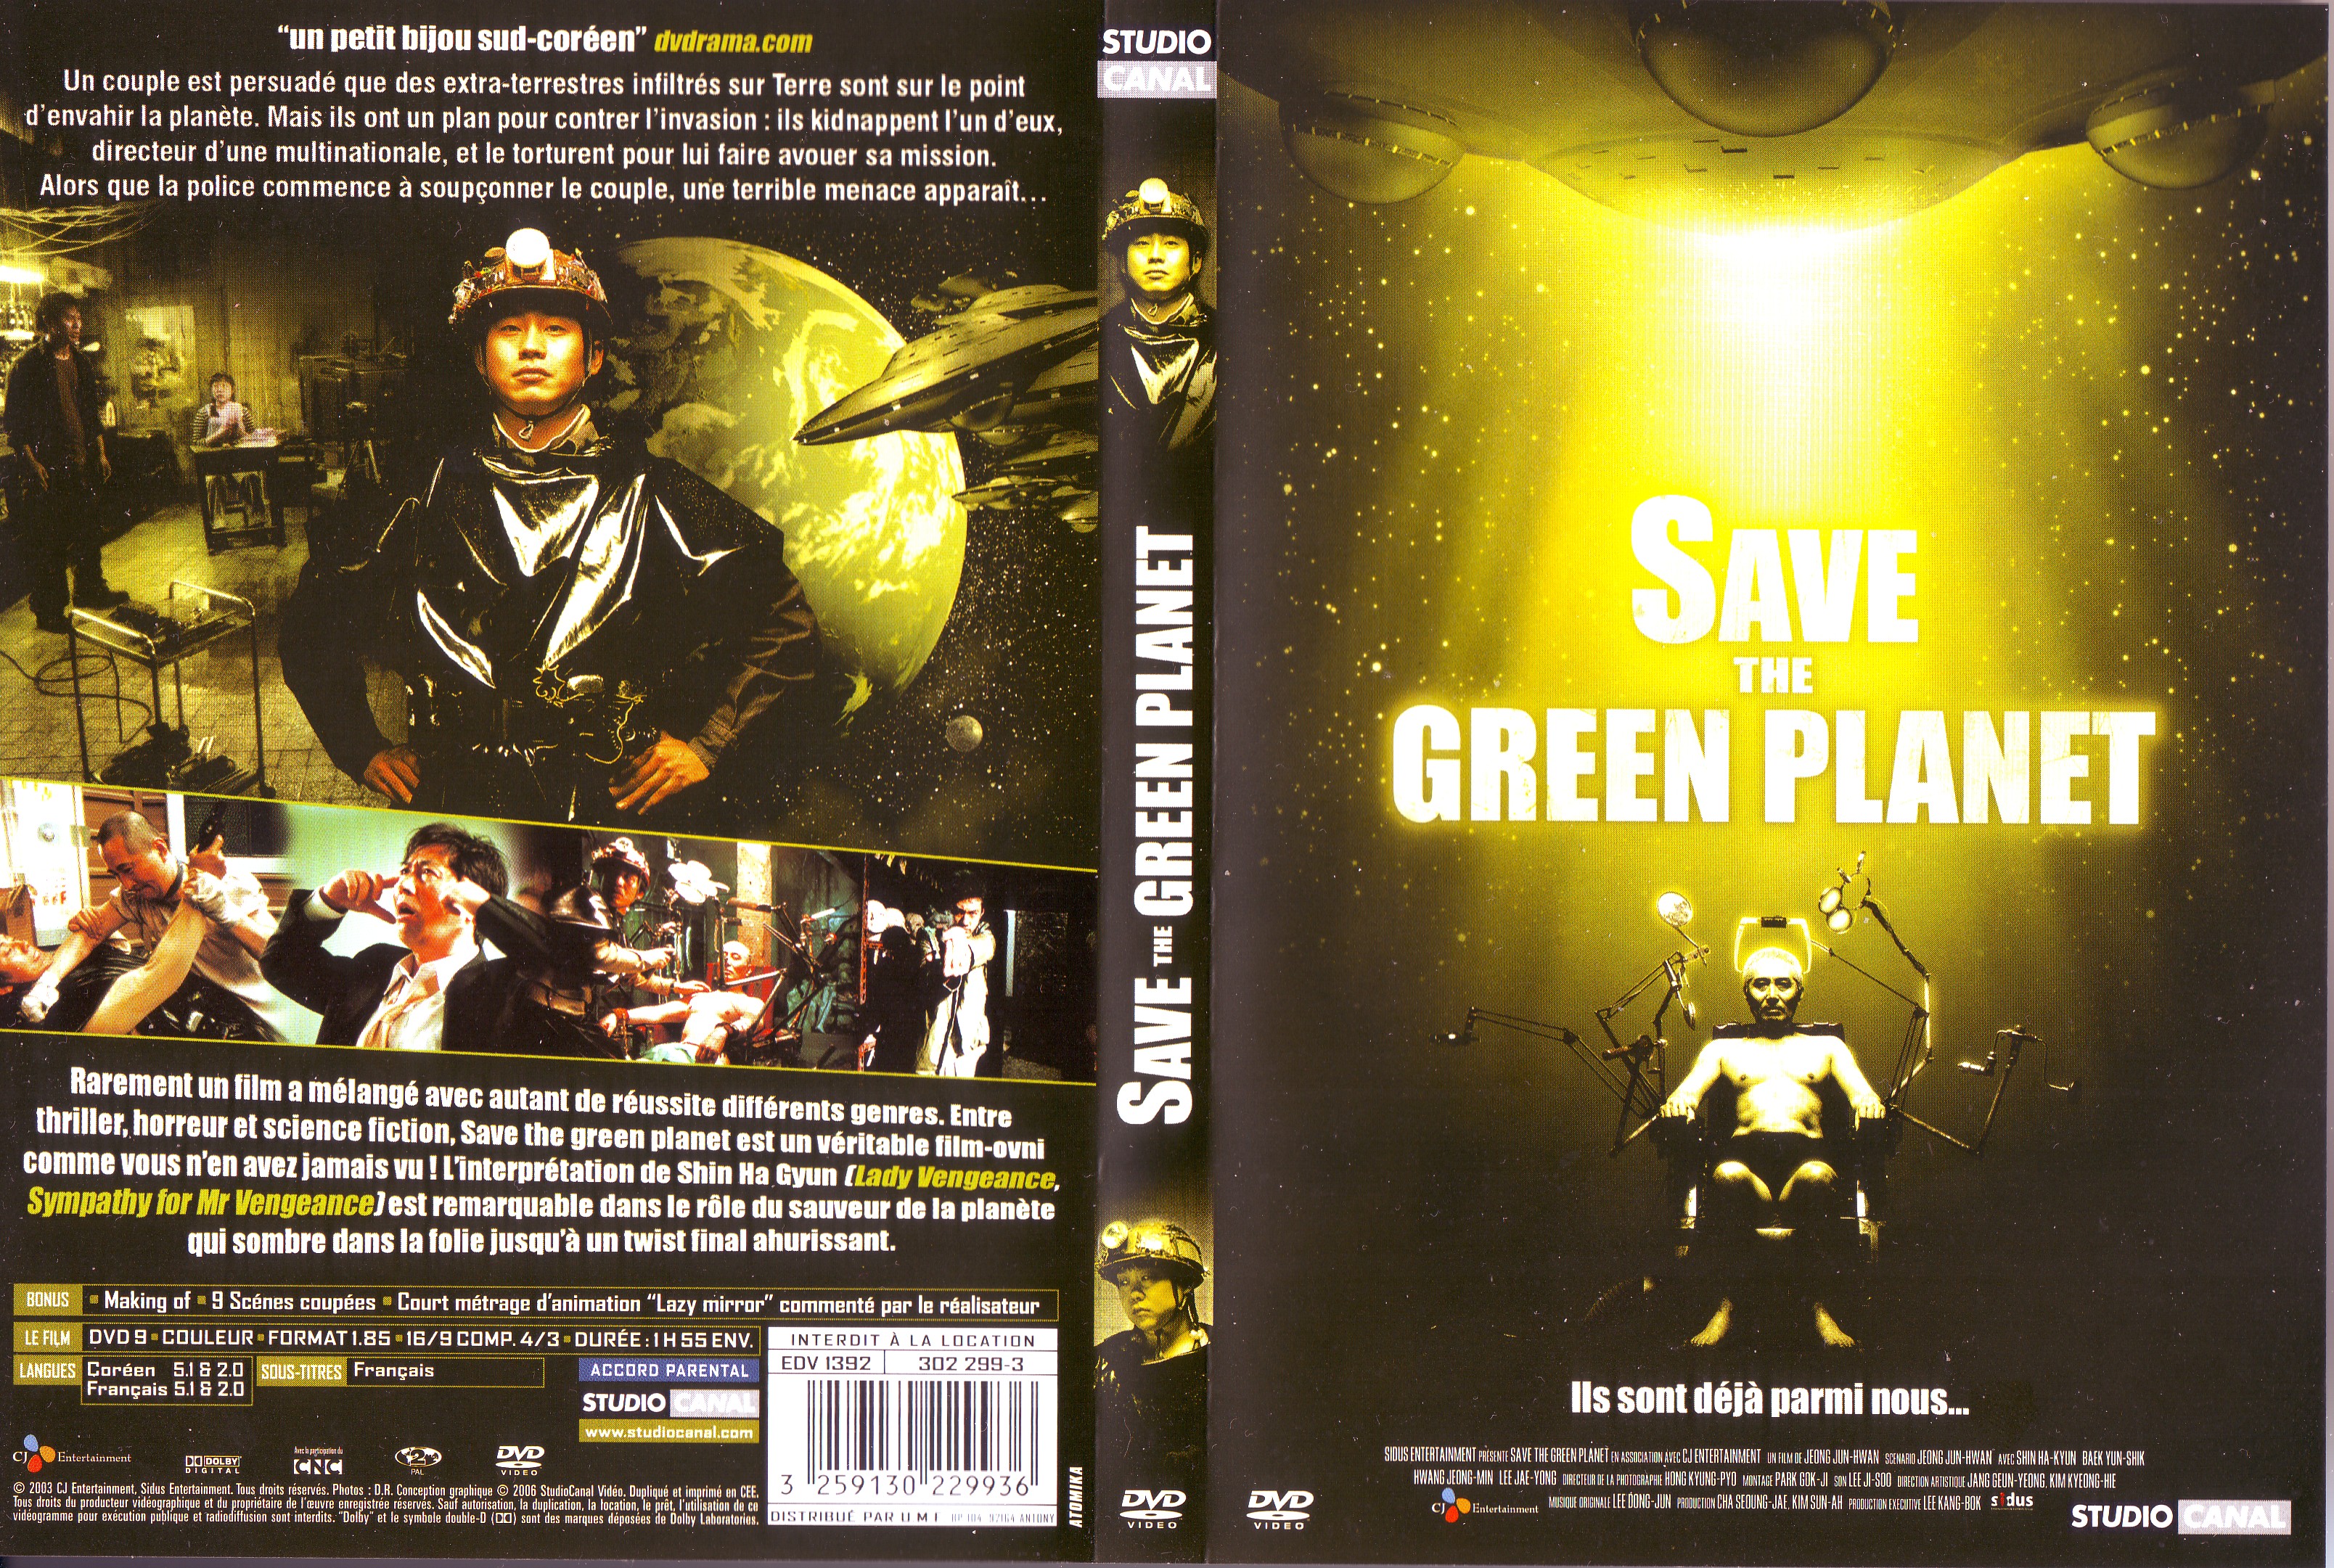 Jaquette DVD Save the green planet